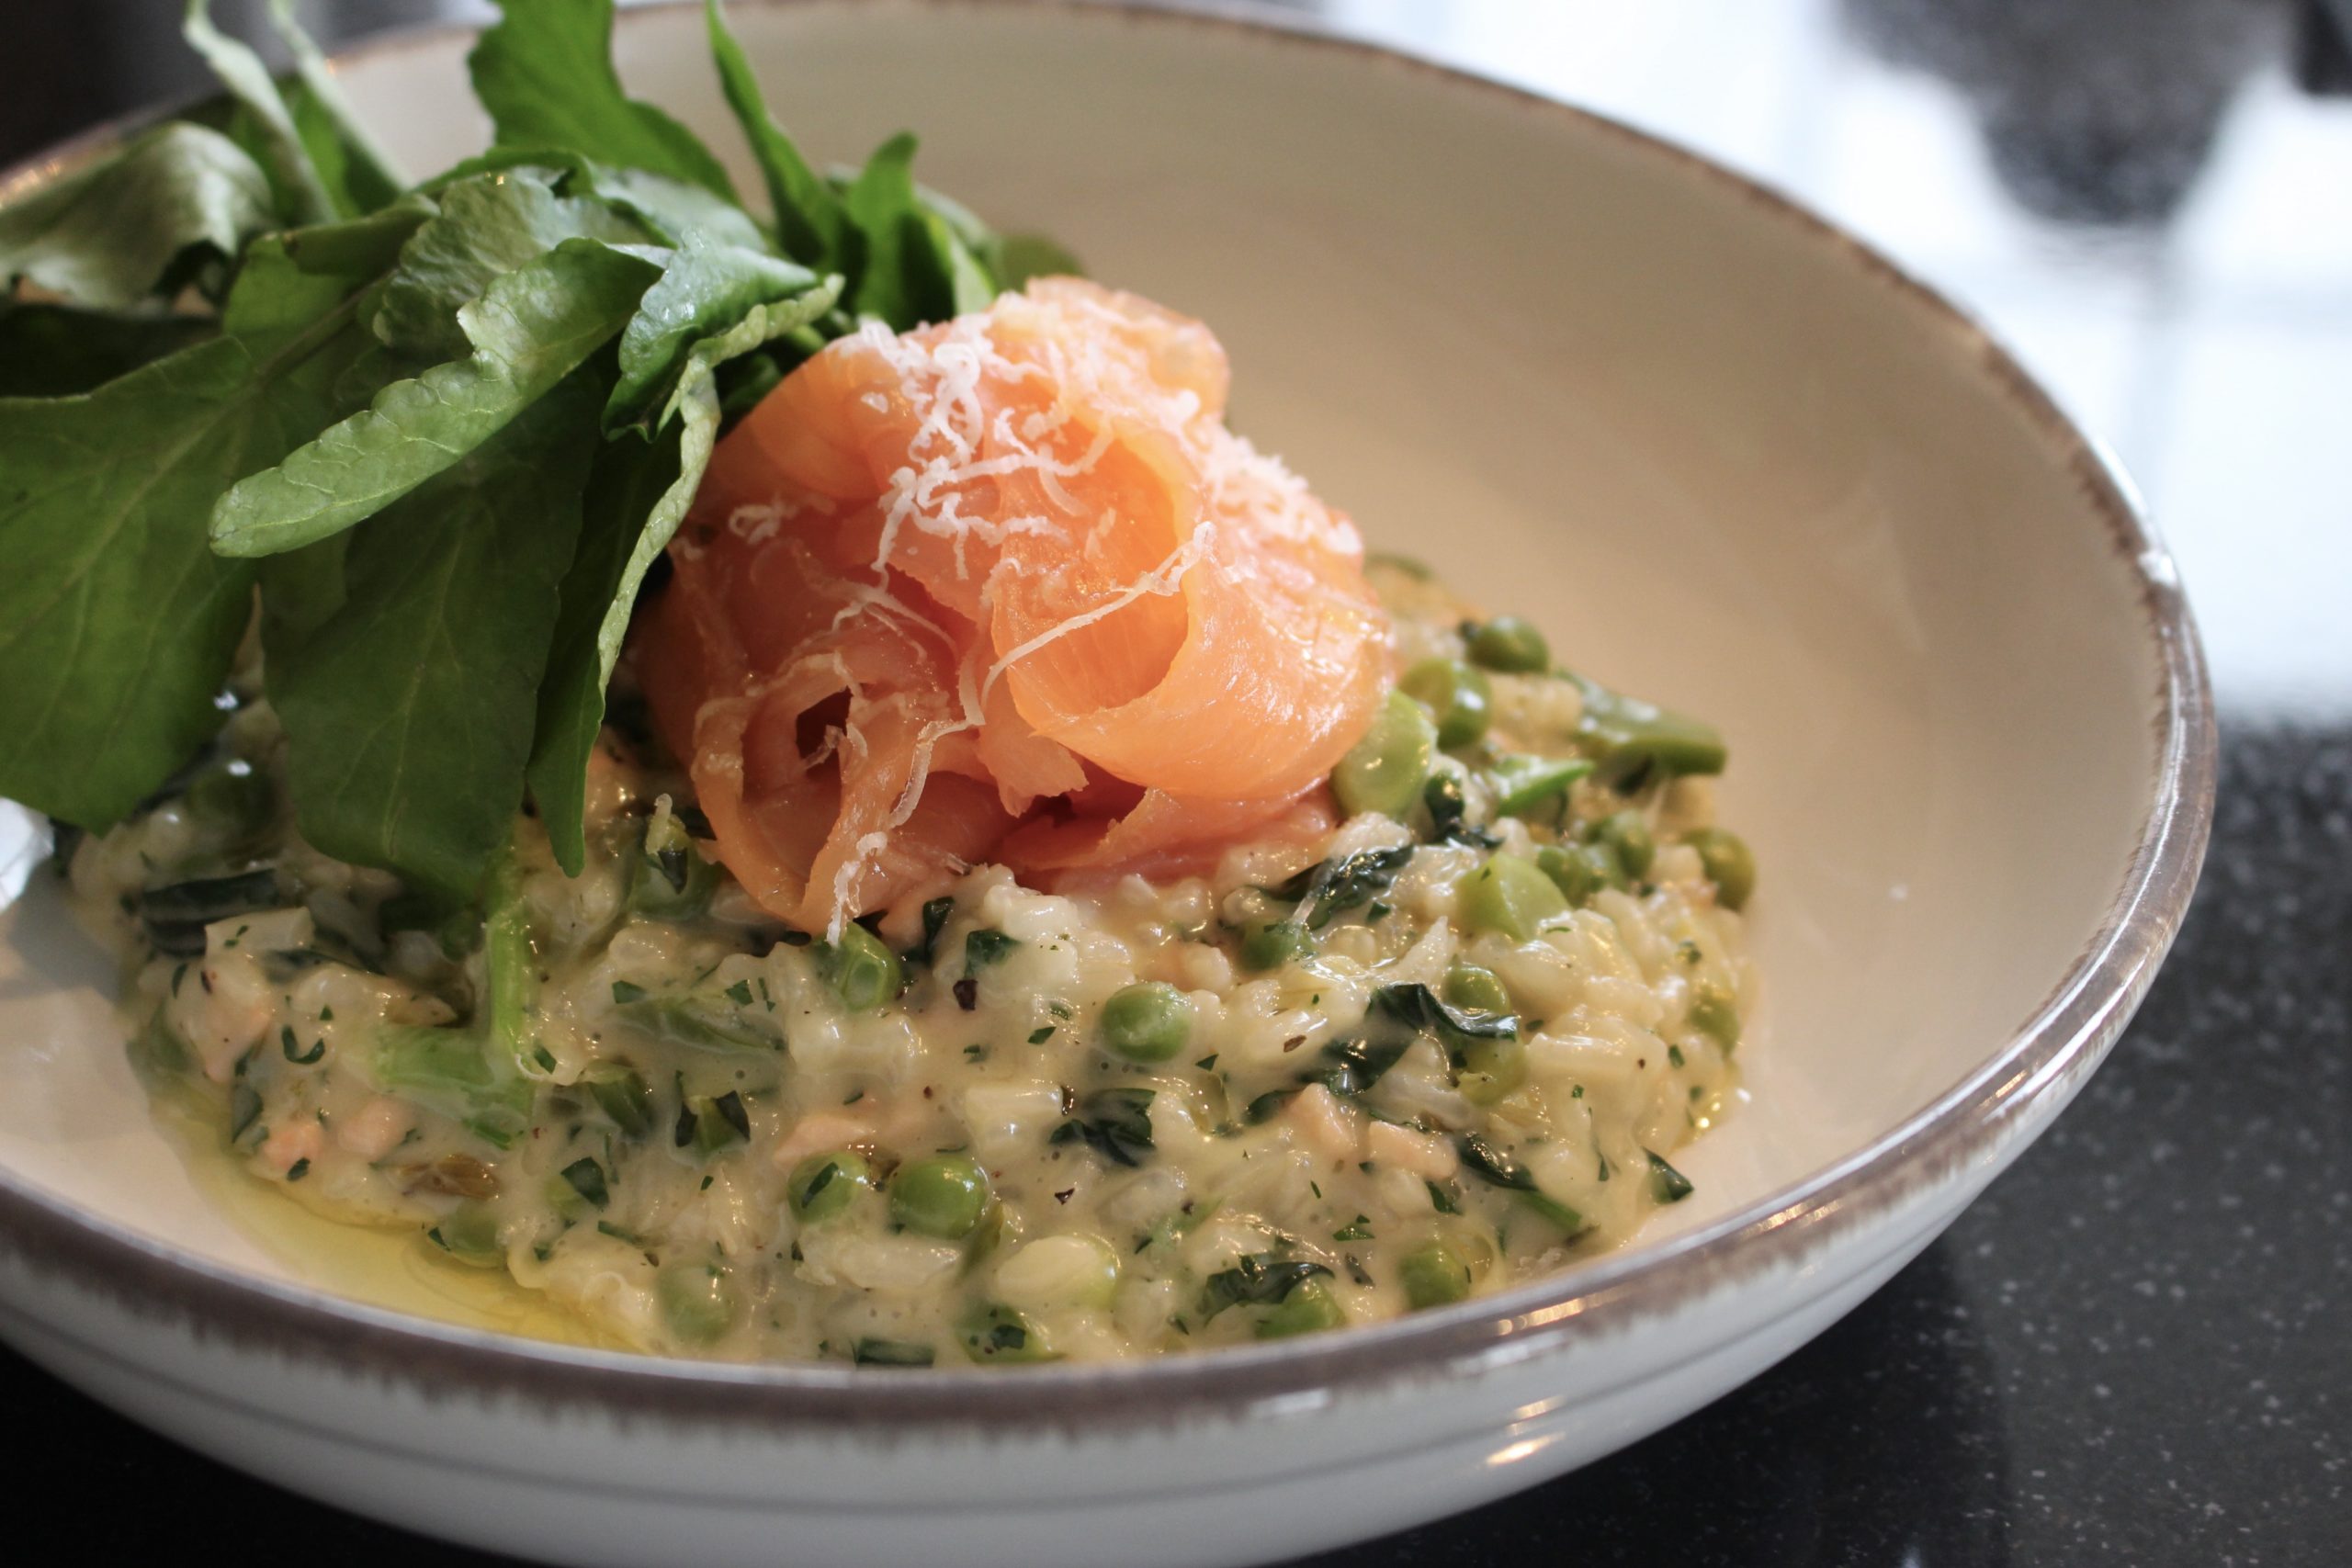 A bowl of wild garlic and spring green risotto with chopped smoked salmon